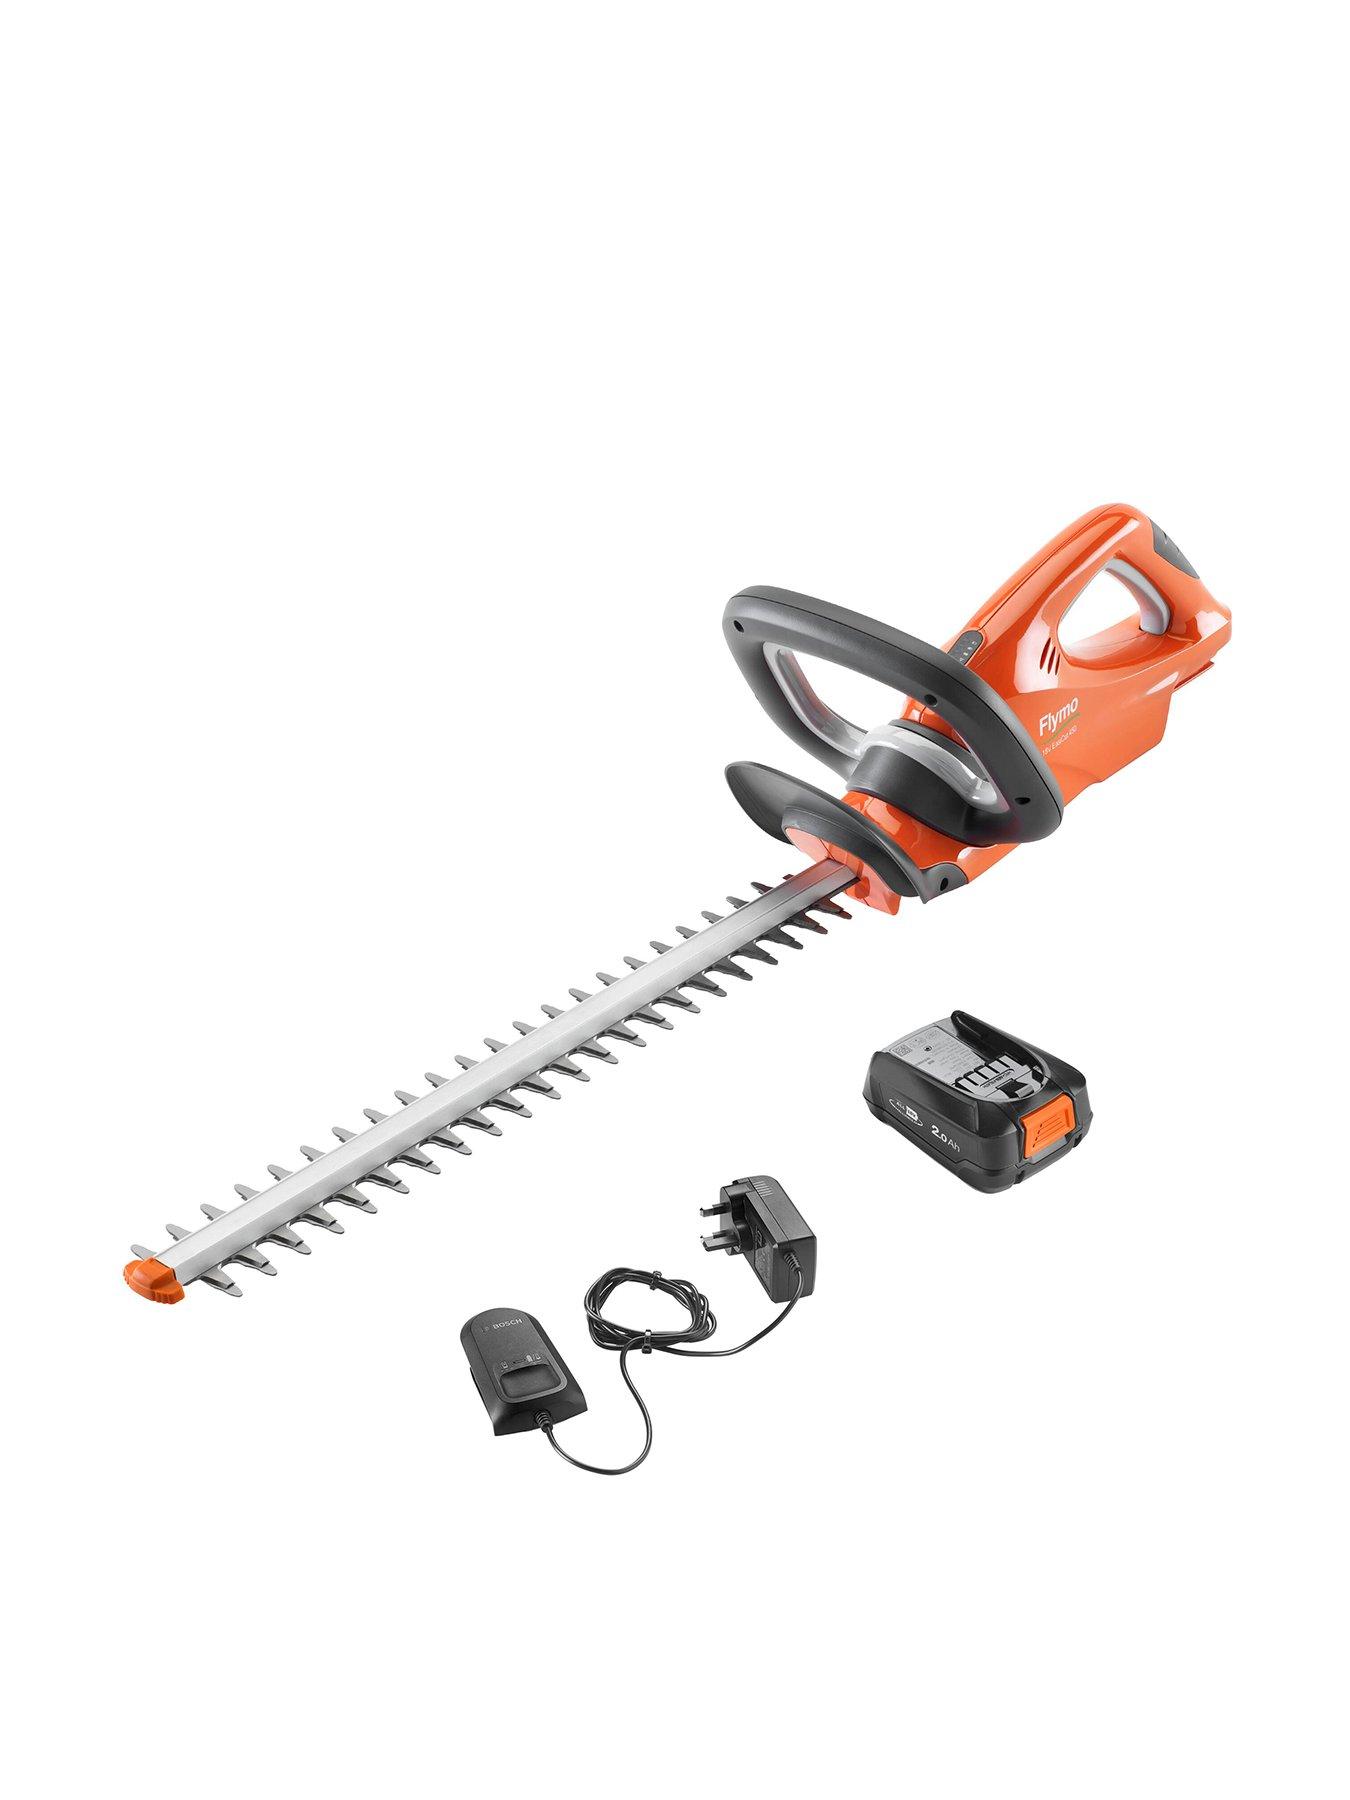 Flymo 18V Easicut 450 Cordless Hedge Trimmer Kit  With Battery And Charger Included